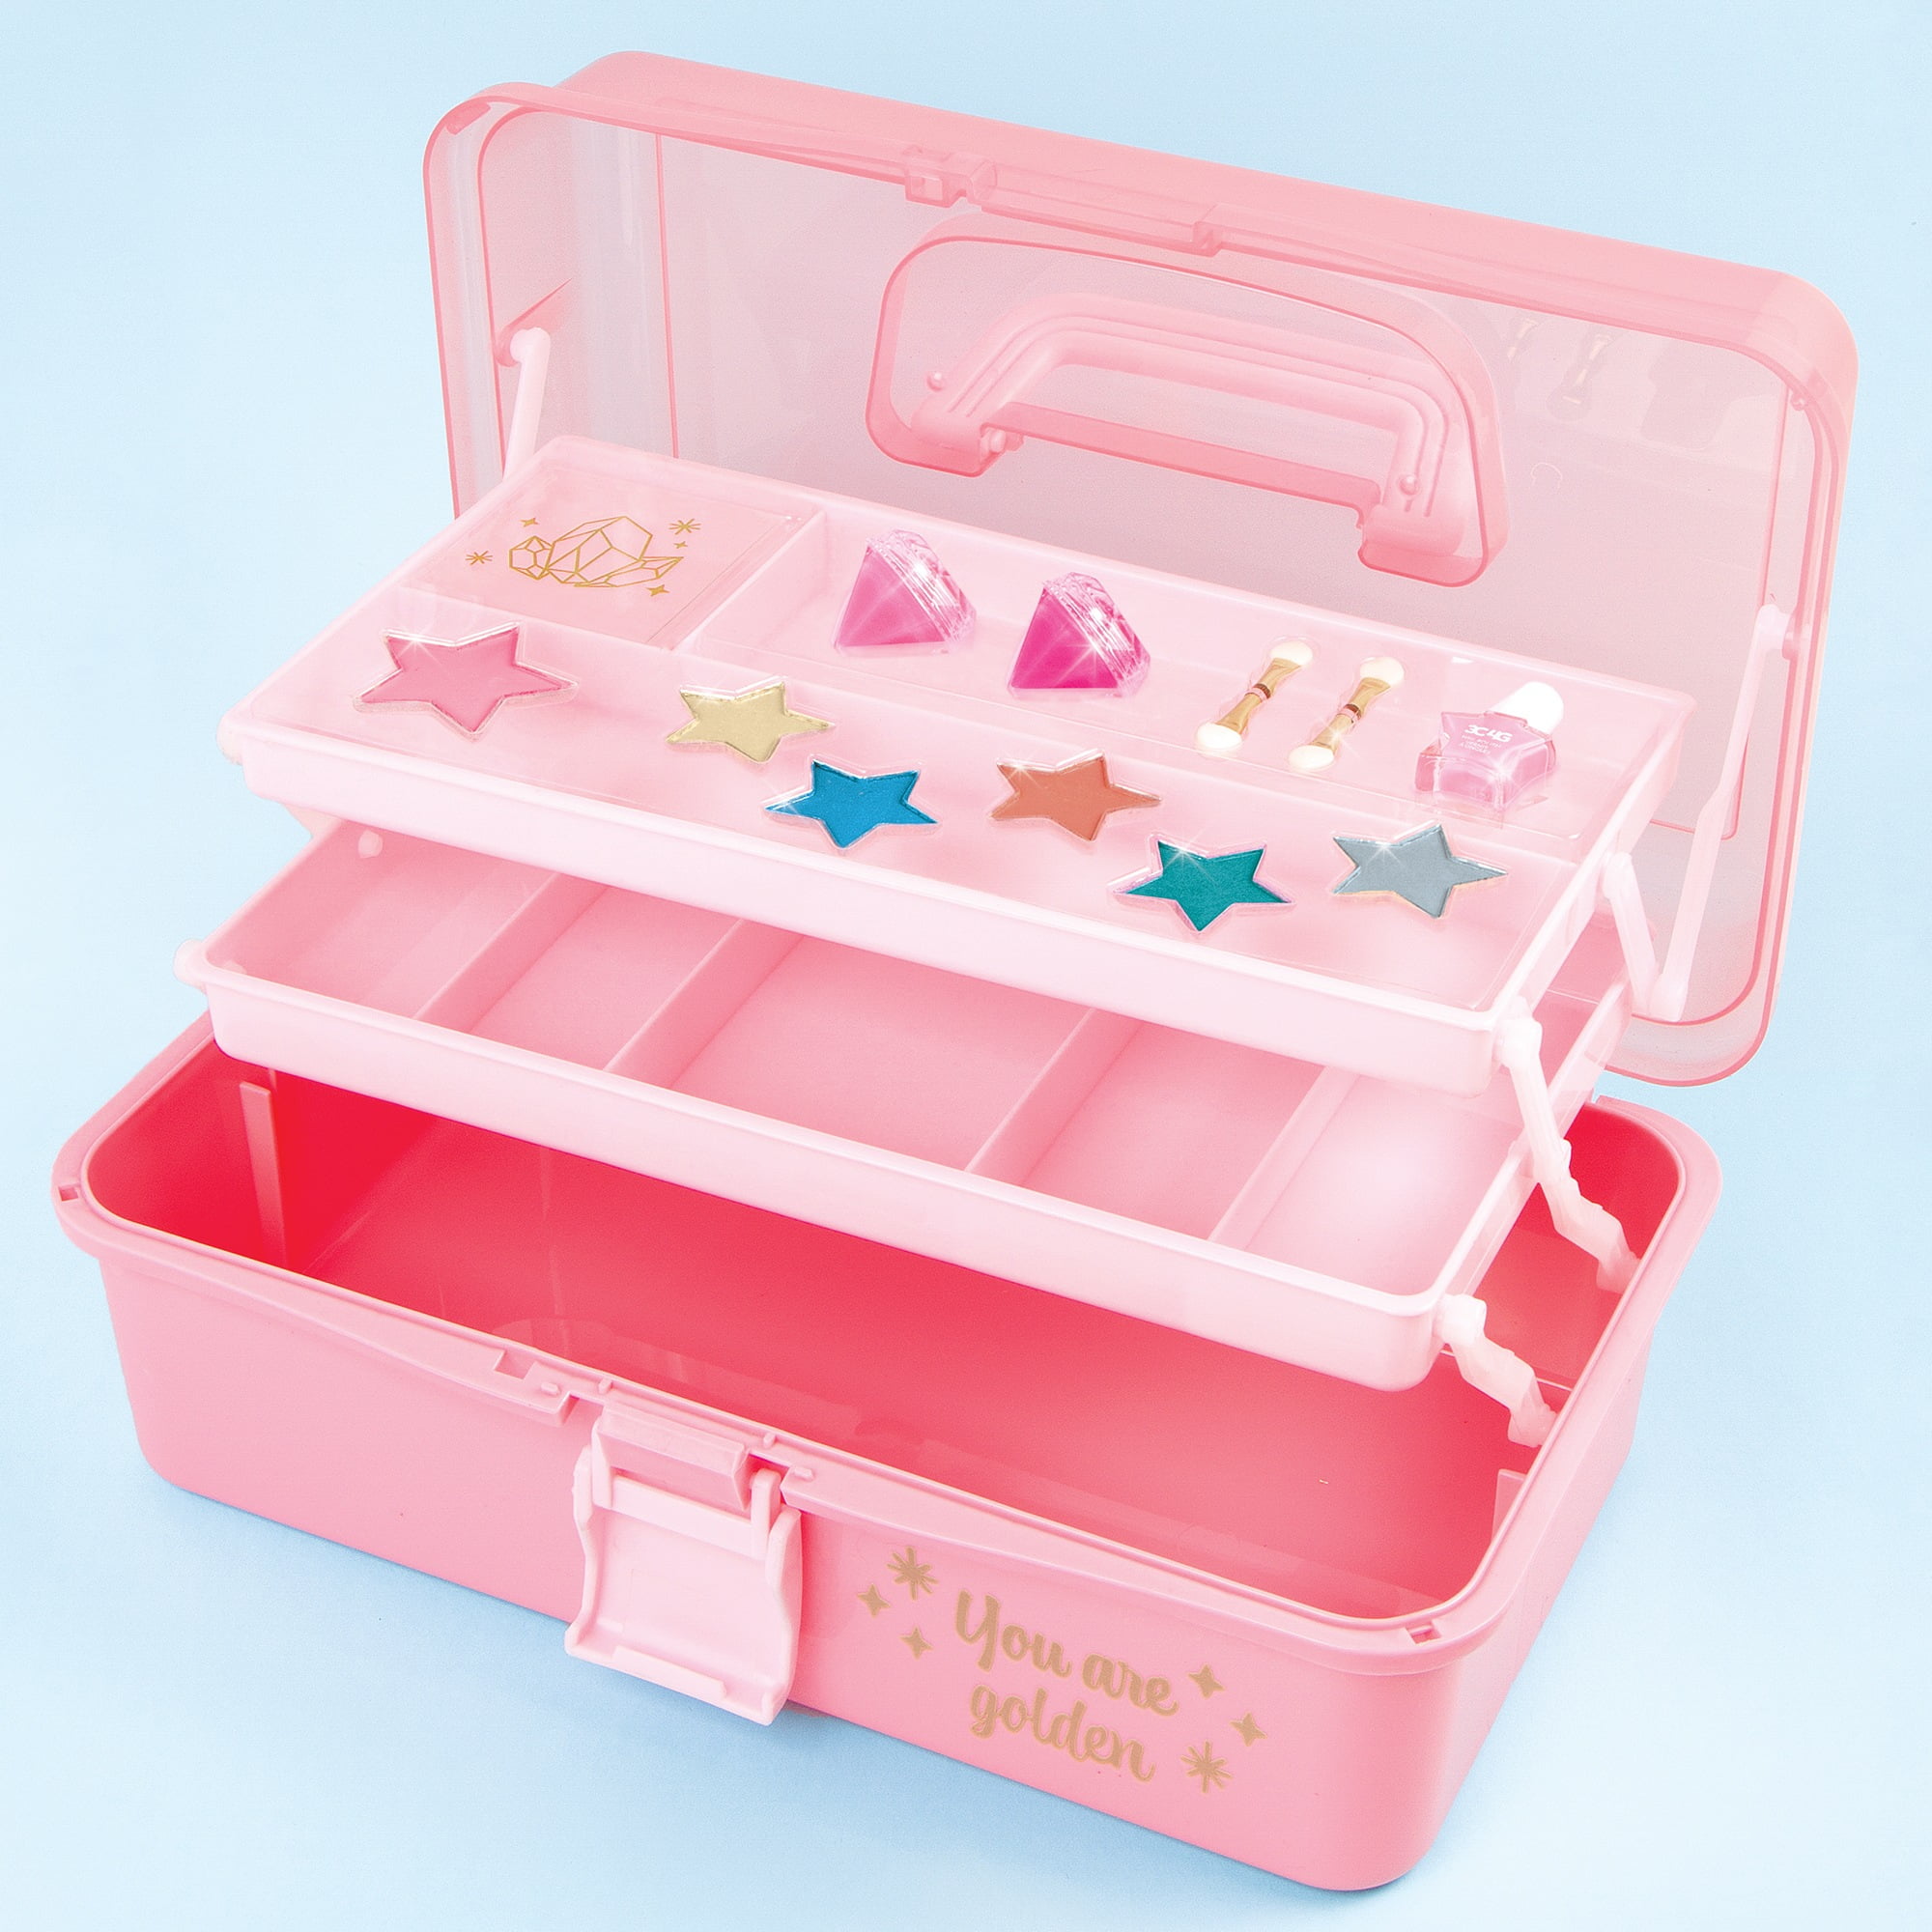 Three Cheers For Girls: Pink & Gold Hard Case Makeup Storage Set Ages 8+